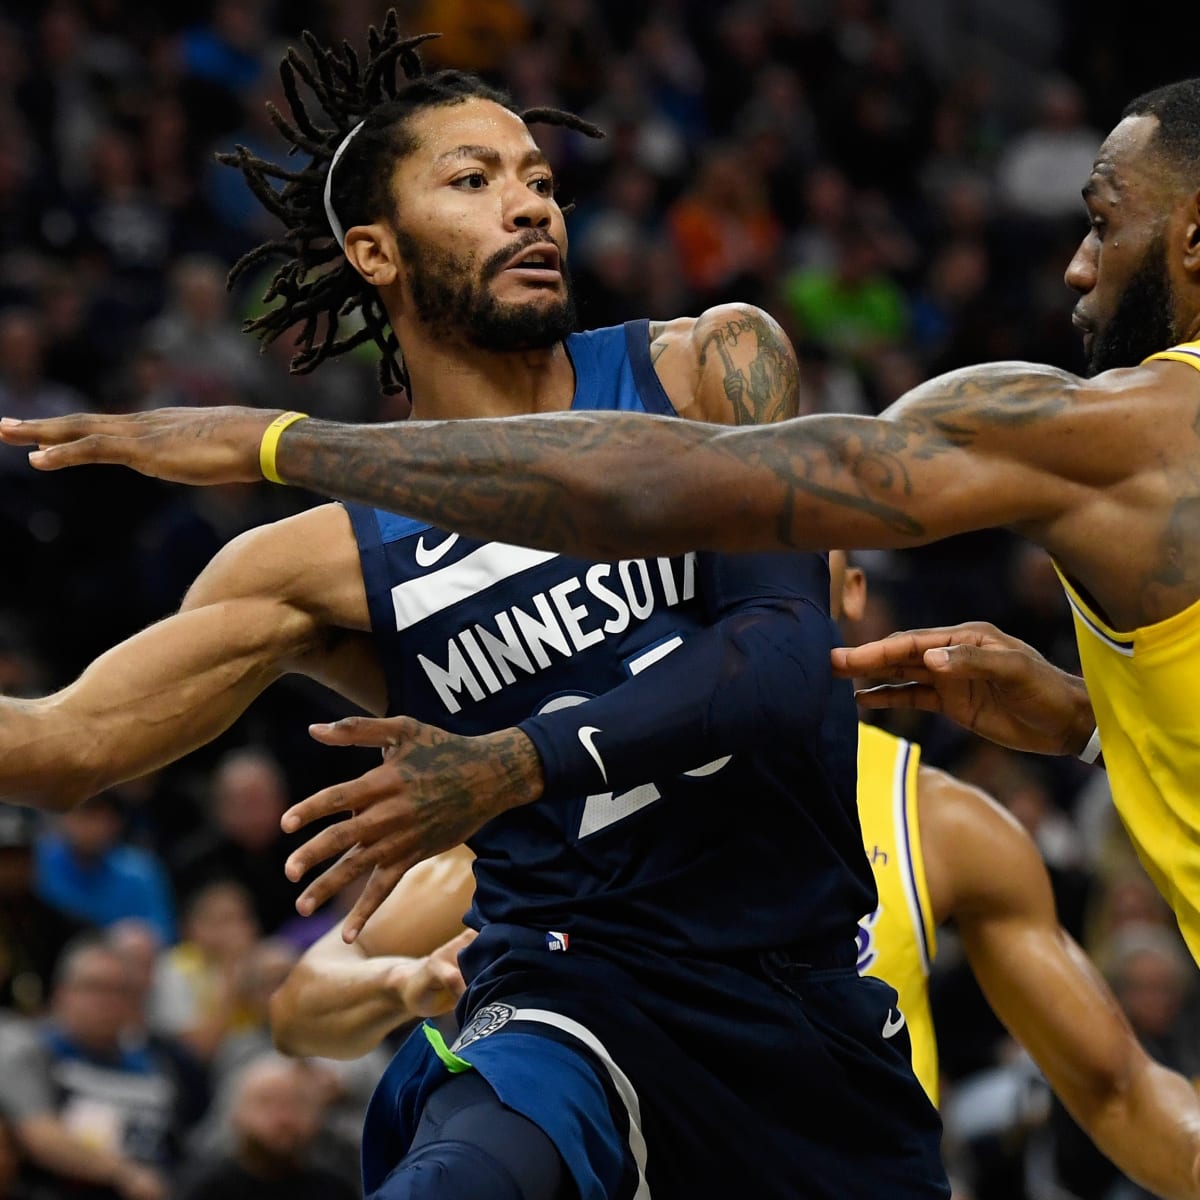 Derrick Rose drops 50 points on Jazz while Jimmy Butler sits